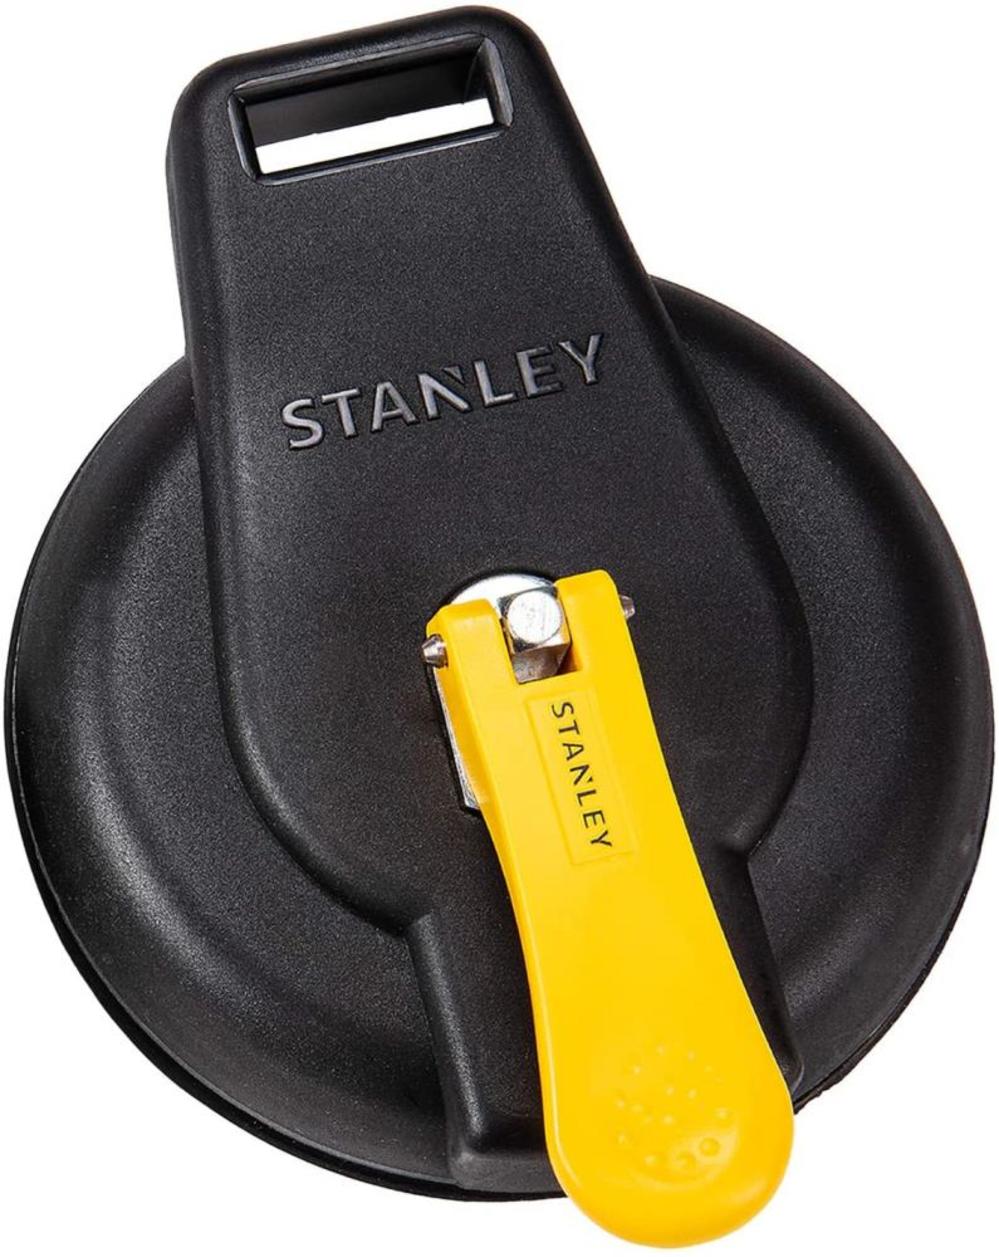 Stanley S4004 Vacuum Suction Cup Heavy Duty 200 lb Weight Support Limit  S4004 from Stanley - Acme Tools